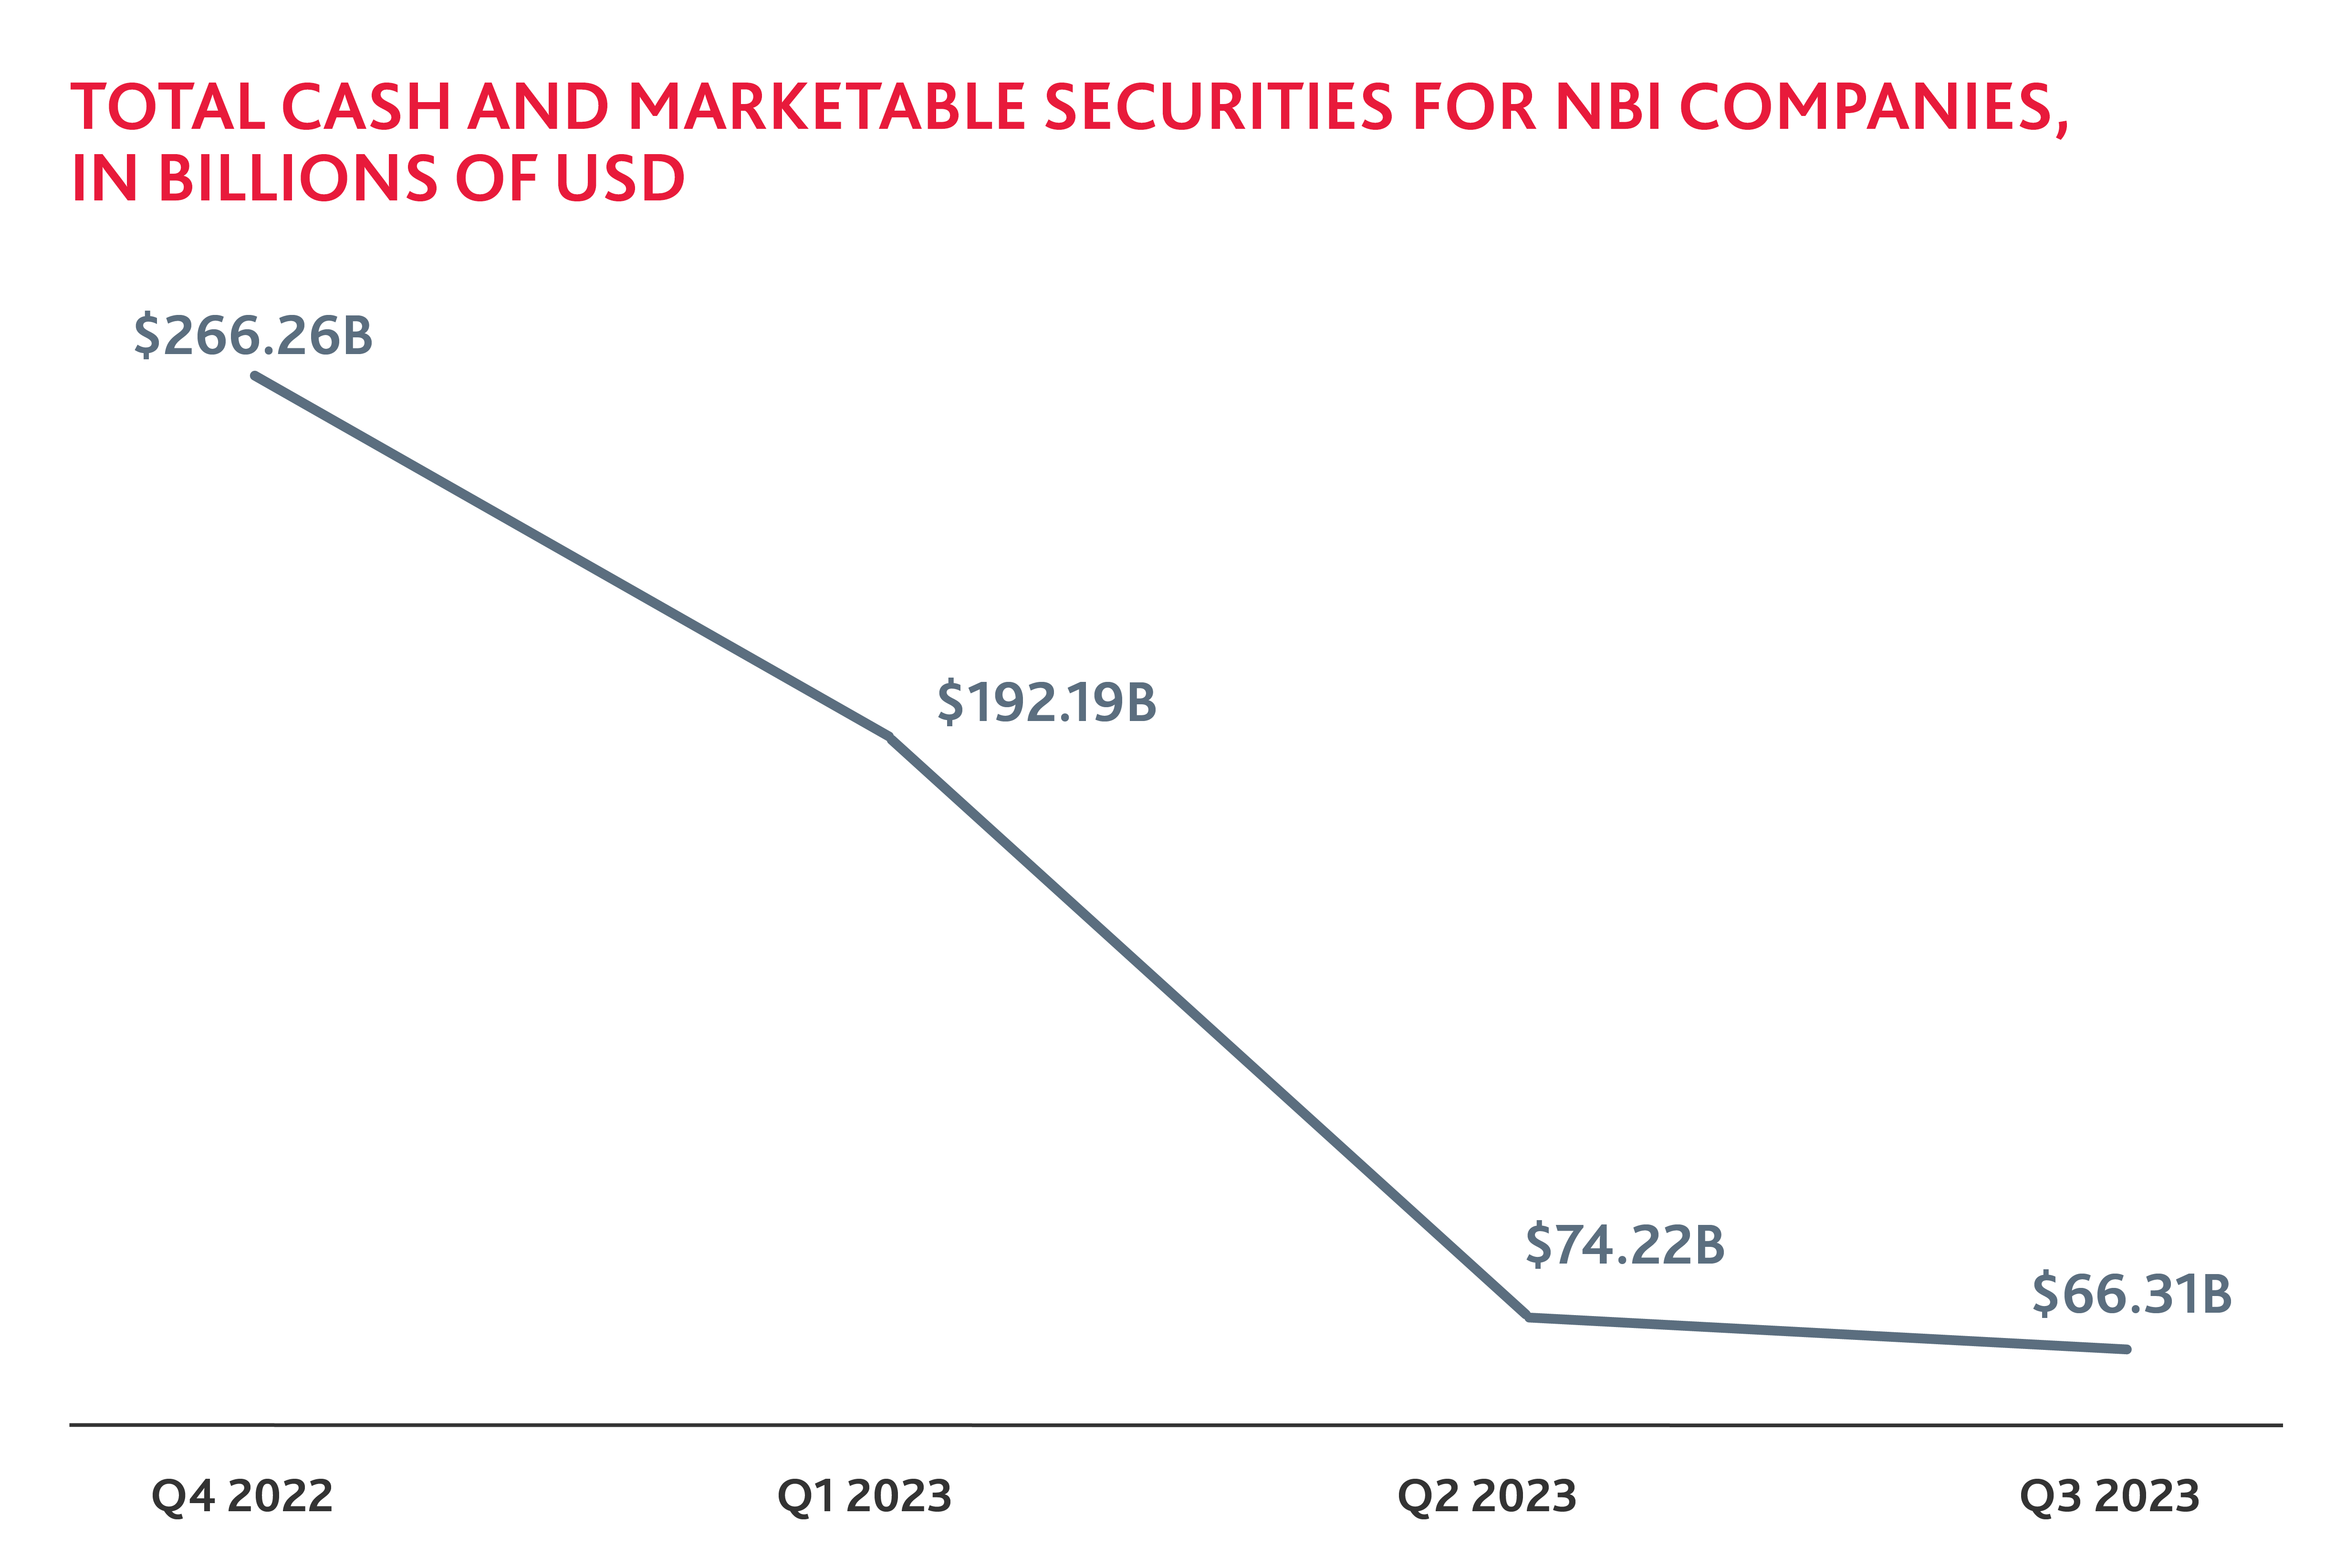 Chart showing total cash and marketable securities for NBI companies from Q4 2022 to Q3 2023